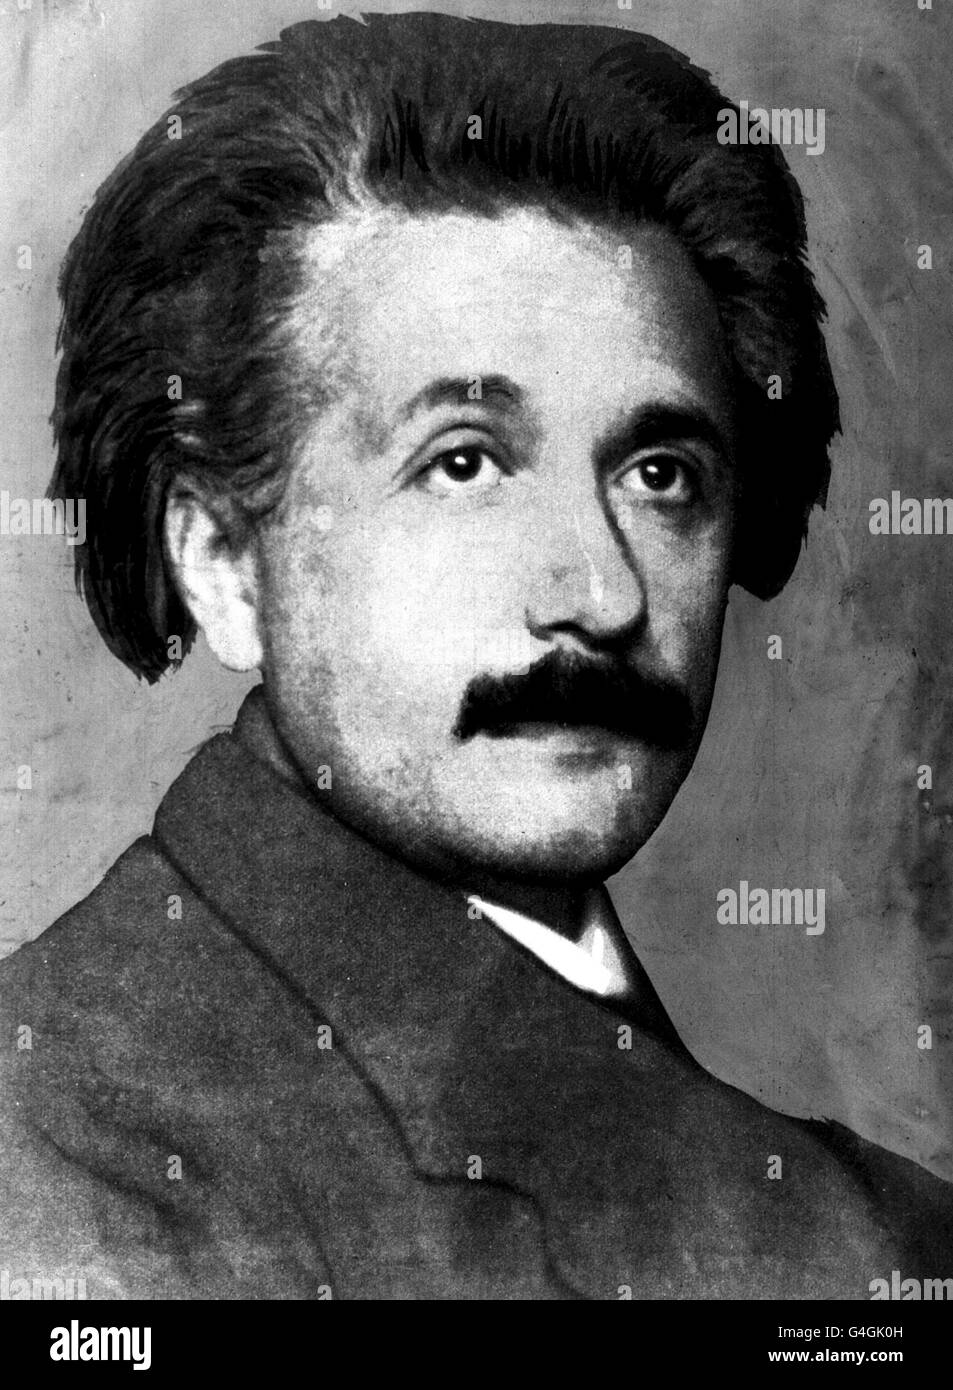 MARCH 14: On this day in 1879 scientist Albert Einstein was born, in Ulm, Germany. He spent his youth in Munich where his family owned a small shop. He did not talk until the age of 3, but even as a youth he showed a brilliant curiosity about nature and an ability to understand difficult mathematical concepts. He is perhaps the most well known scientist of the 20th Century. A LIBRARY PHOTO OF PROFESSOR ALBERT EINSTEIN, c1921. 19/03/01: A new survey released reveals that British people are more inspired by scientists Marie Curie and Albert Einstein than celebrities Posh and Becks. * The Mori Stock Photo